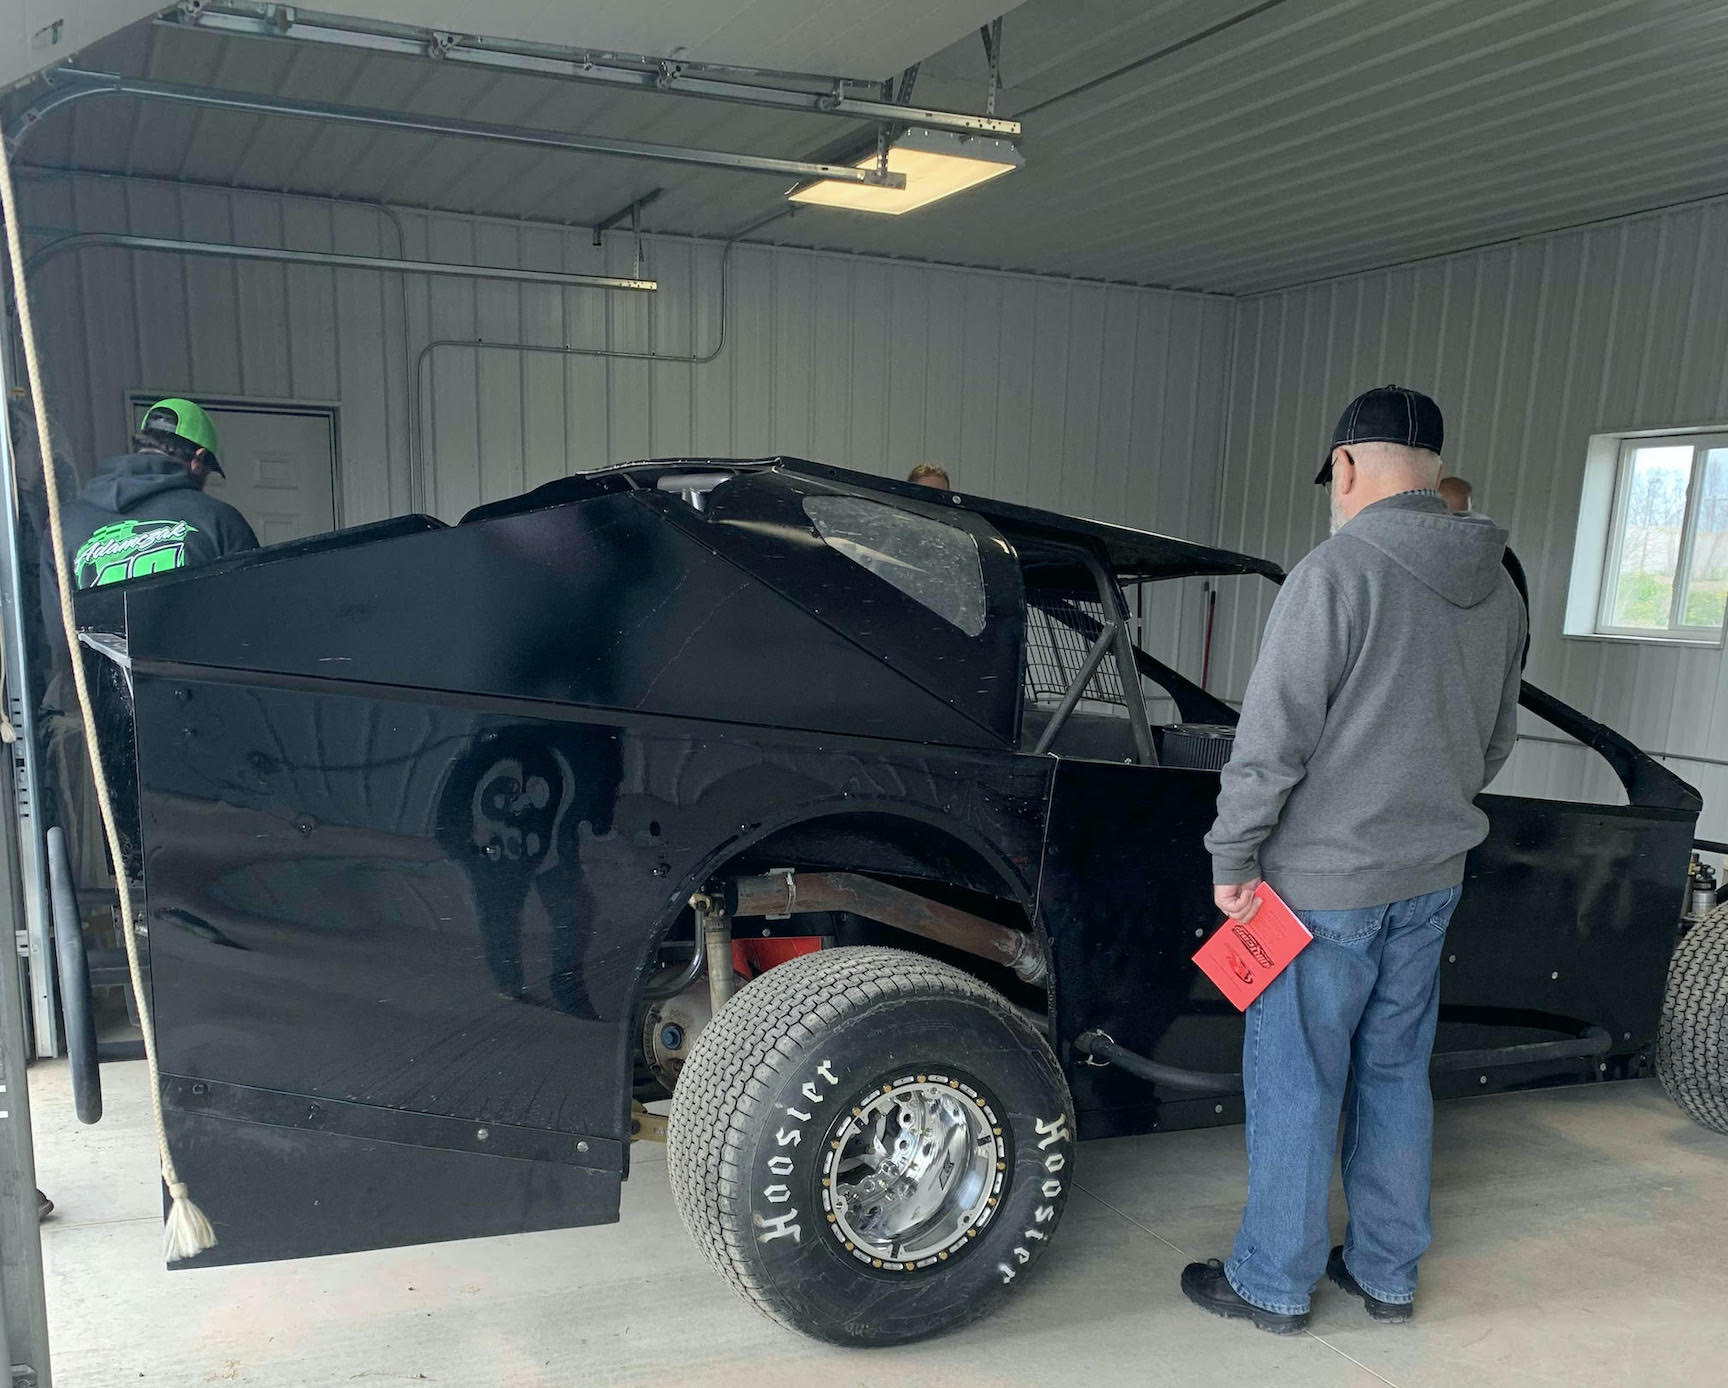 Colby Adamczak's Sportsman going through pre-tech. (Image courtesy of `The Big R`)